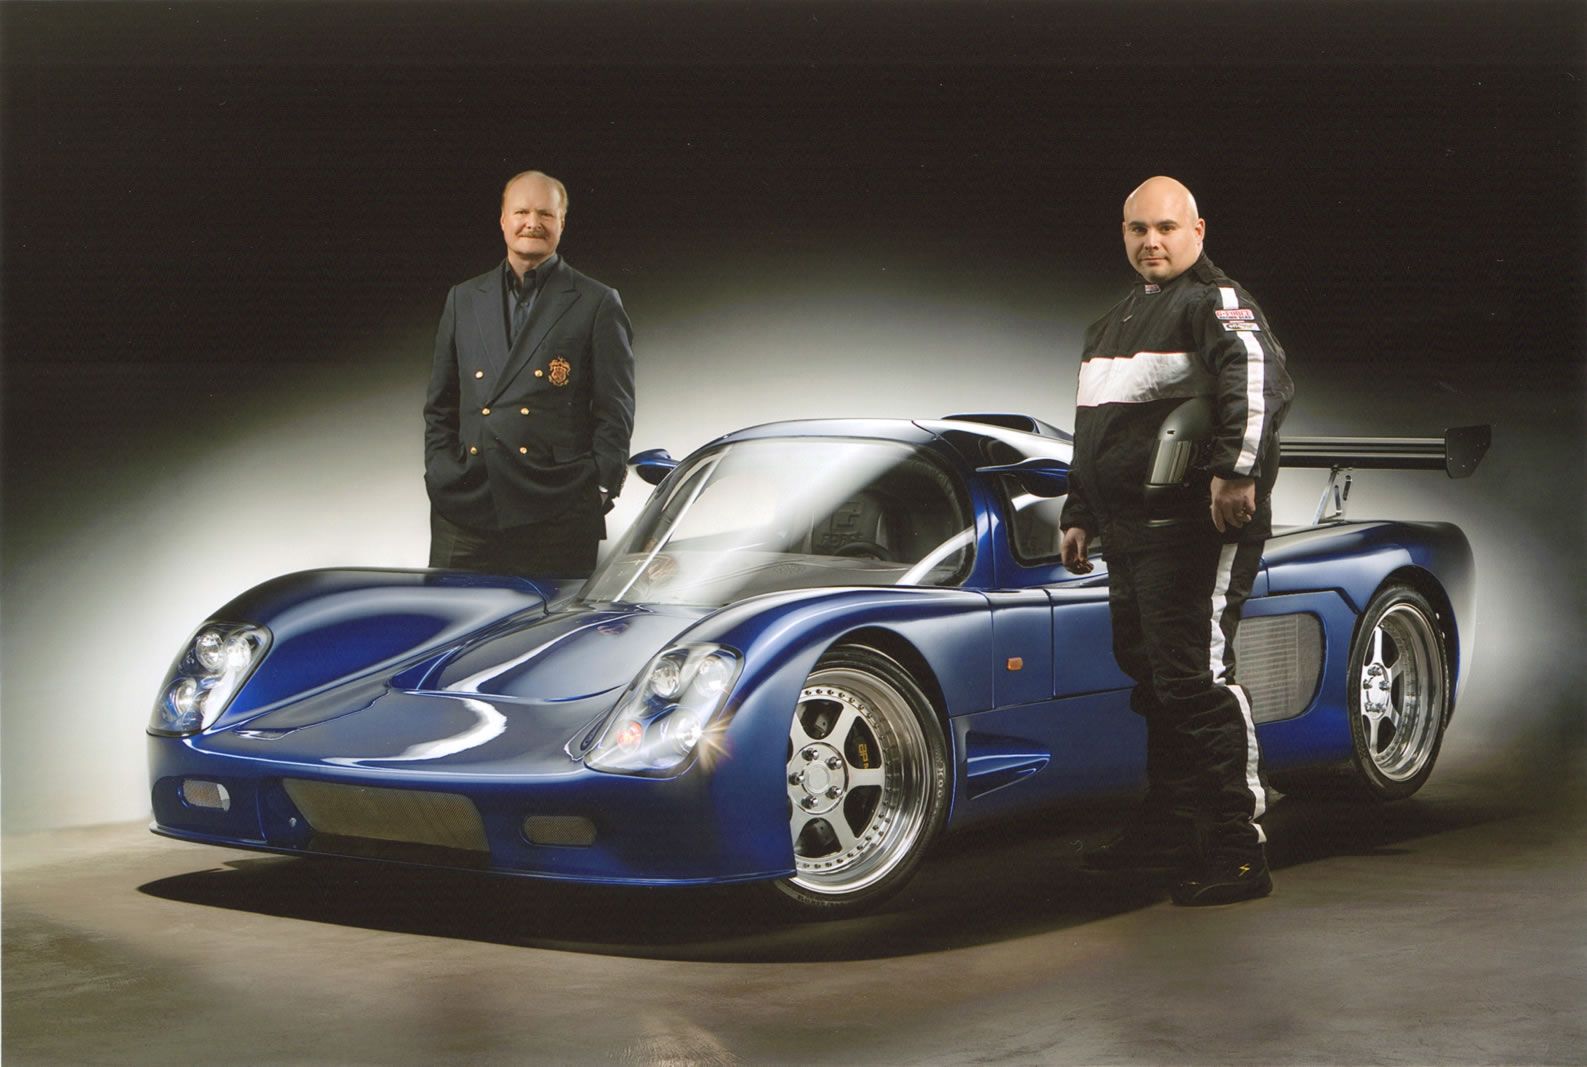 Fastest street car: The Maxximus G-Force sets new world records 